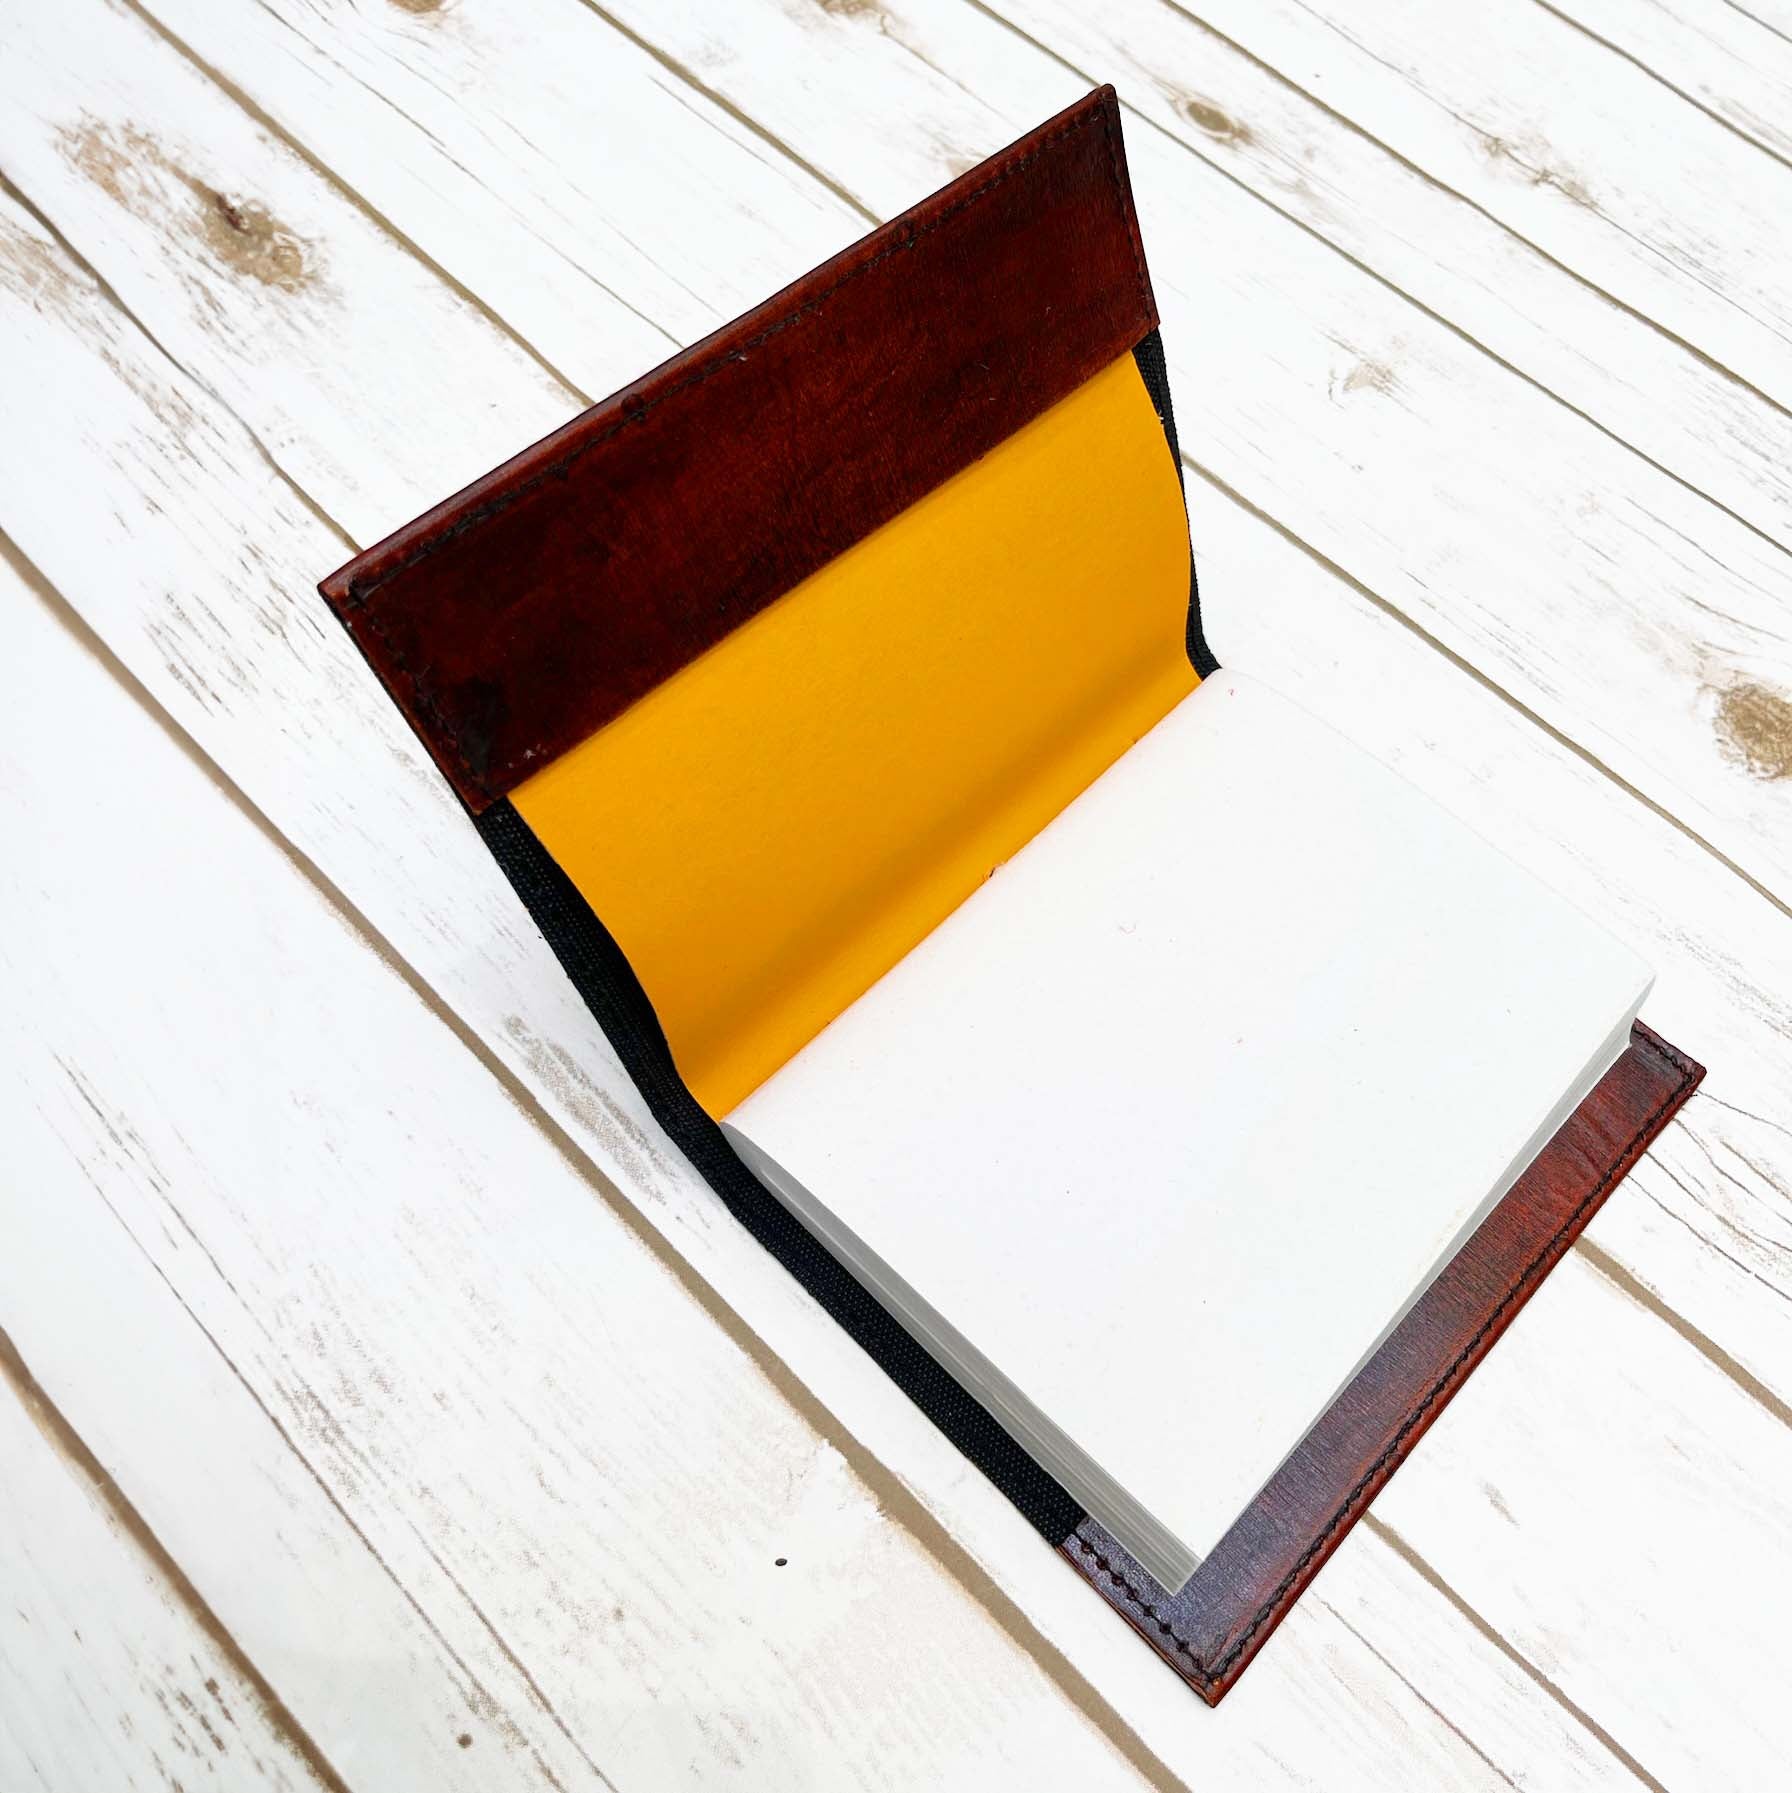 Robert Frost Refillable Leather Journal